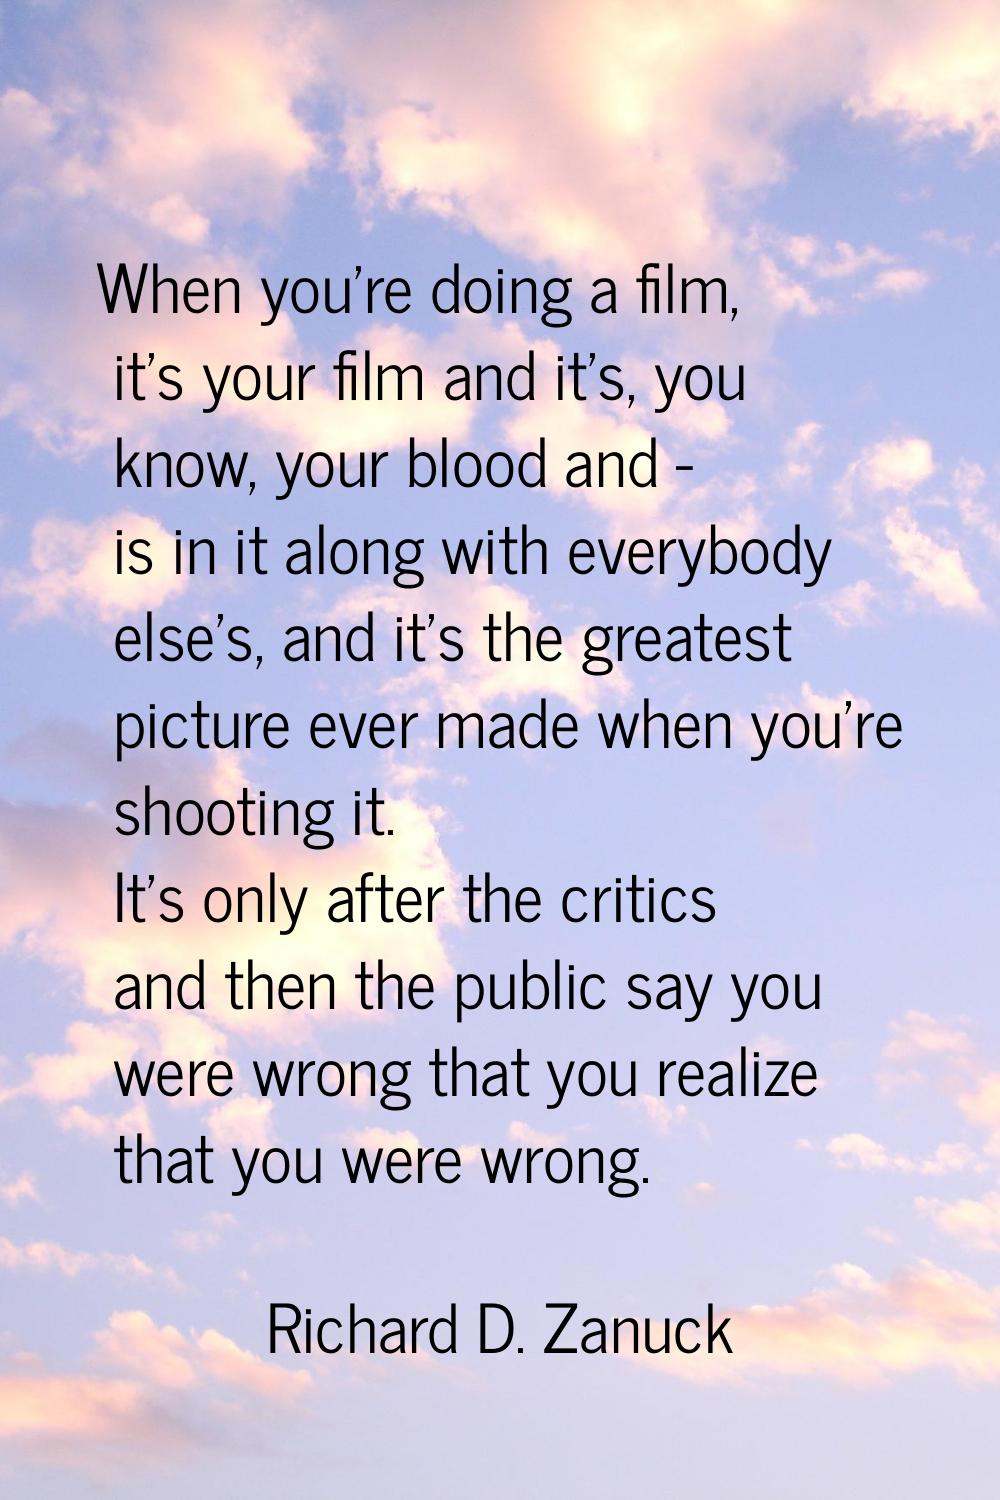 When you're doing a film, it's your film and it's, you know, your blood and - is in it along with e